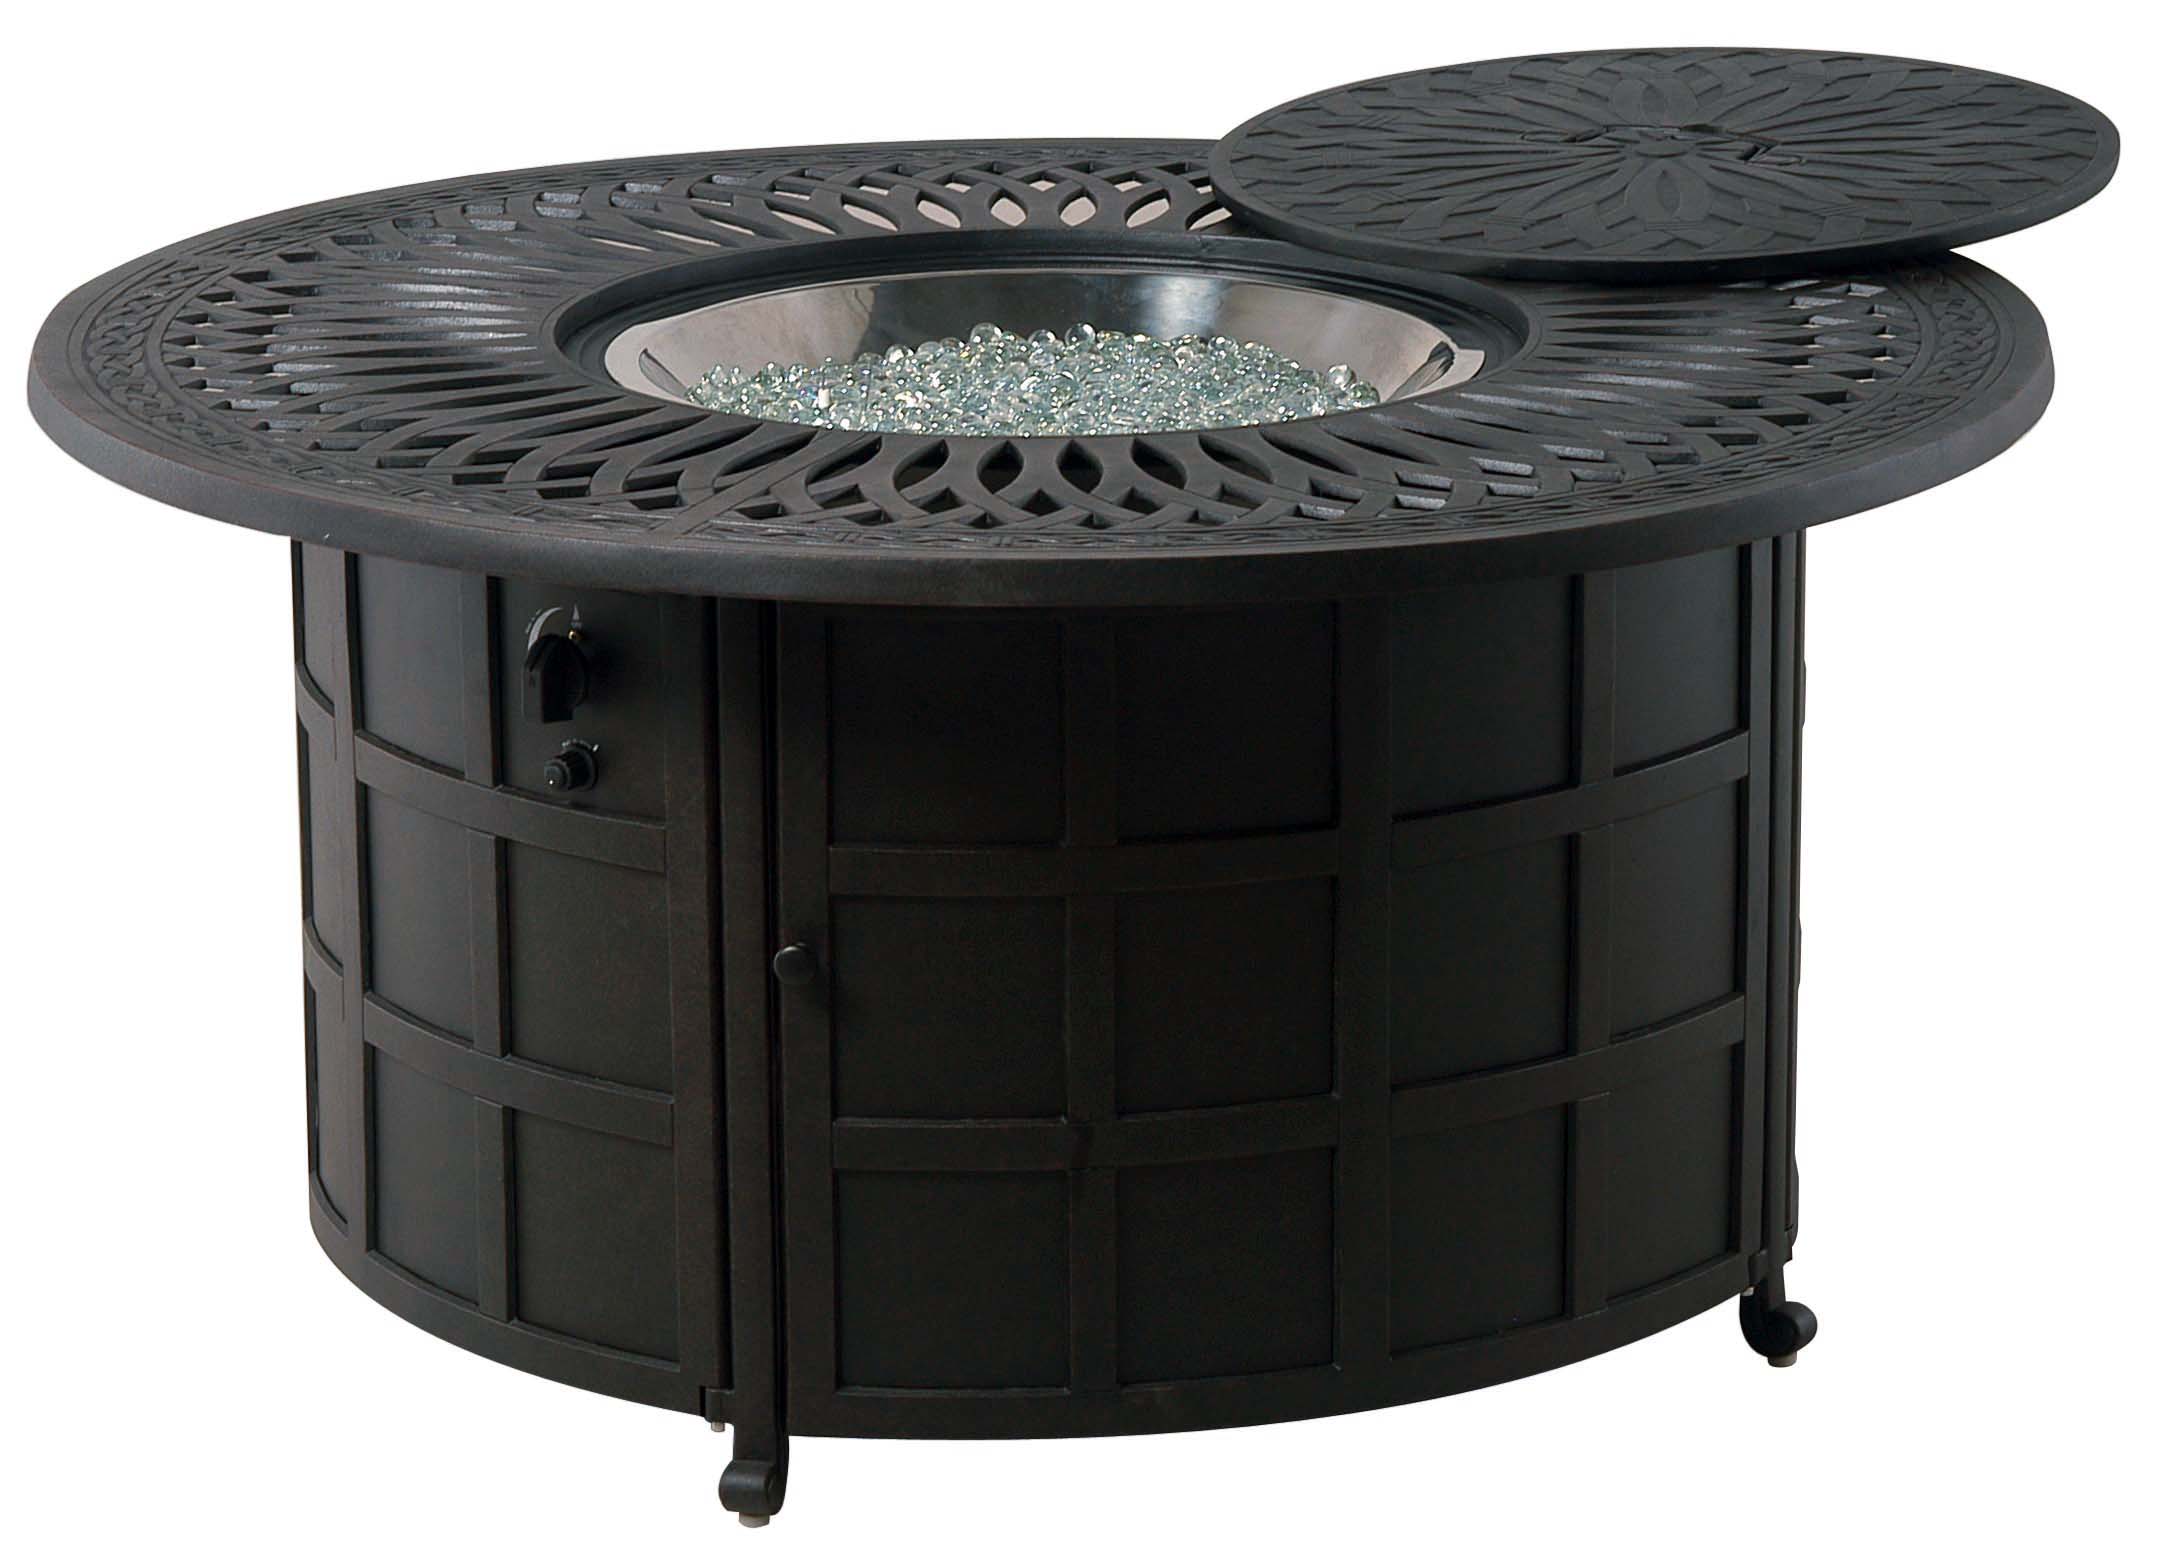 Hanamint Mayfair 48" Round Enclosed Gas Fire Pit Table Fireplaces 12039142